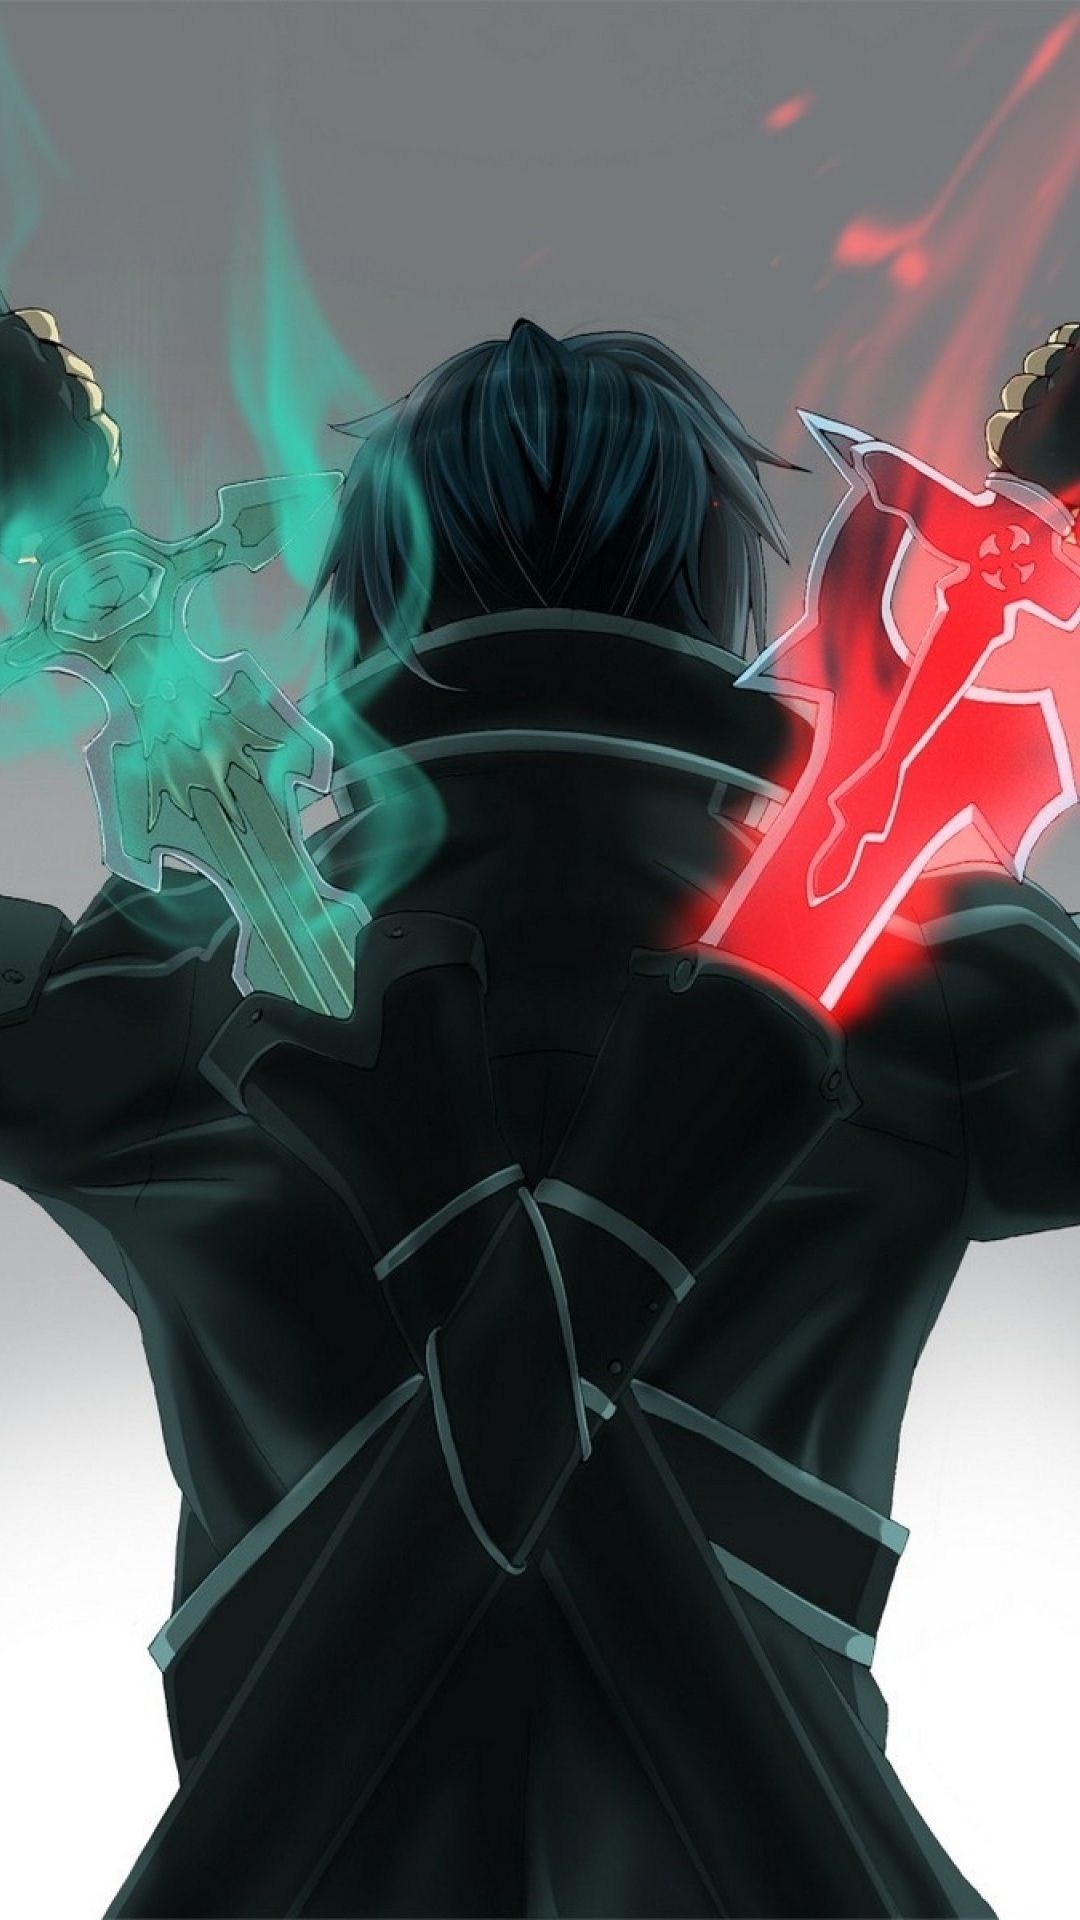 ✓[60+] Anime Sword Art Online (1080x1920) Wallpaper - Android / iPhone HD  Wallpaper Background Download (png / jpg) (2023)